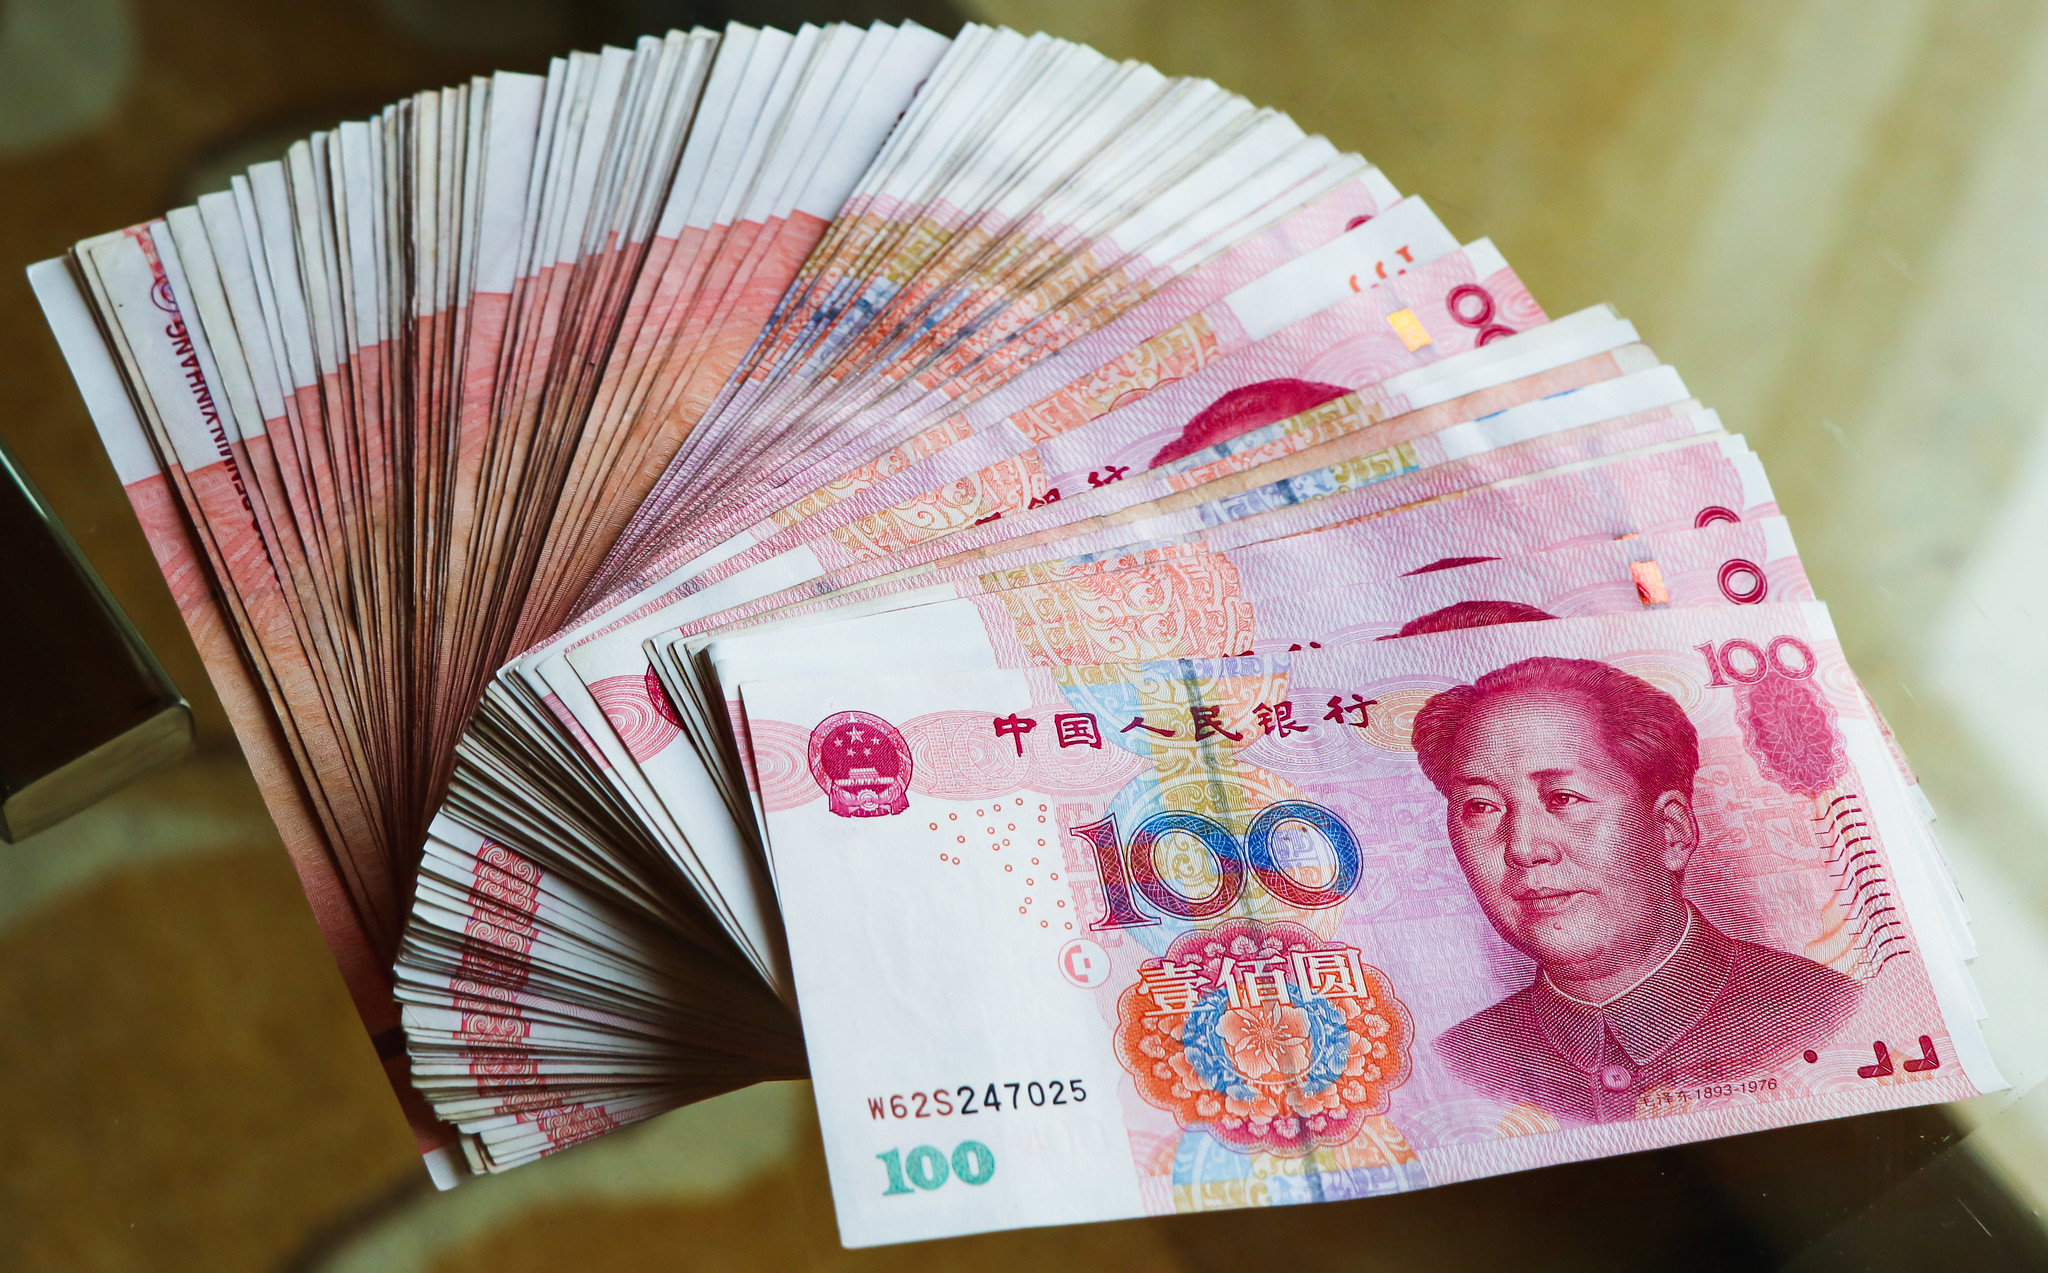 If China’s Yuan Usurps The Dollar, The World Economy Will Be At Communists’ Whims